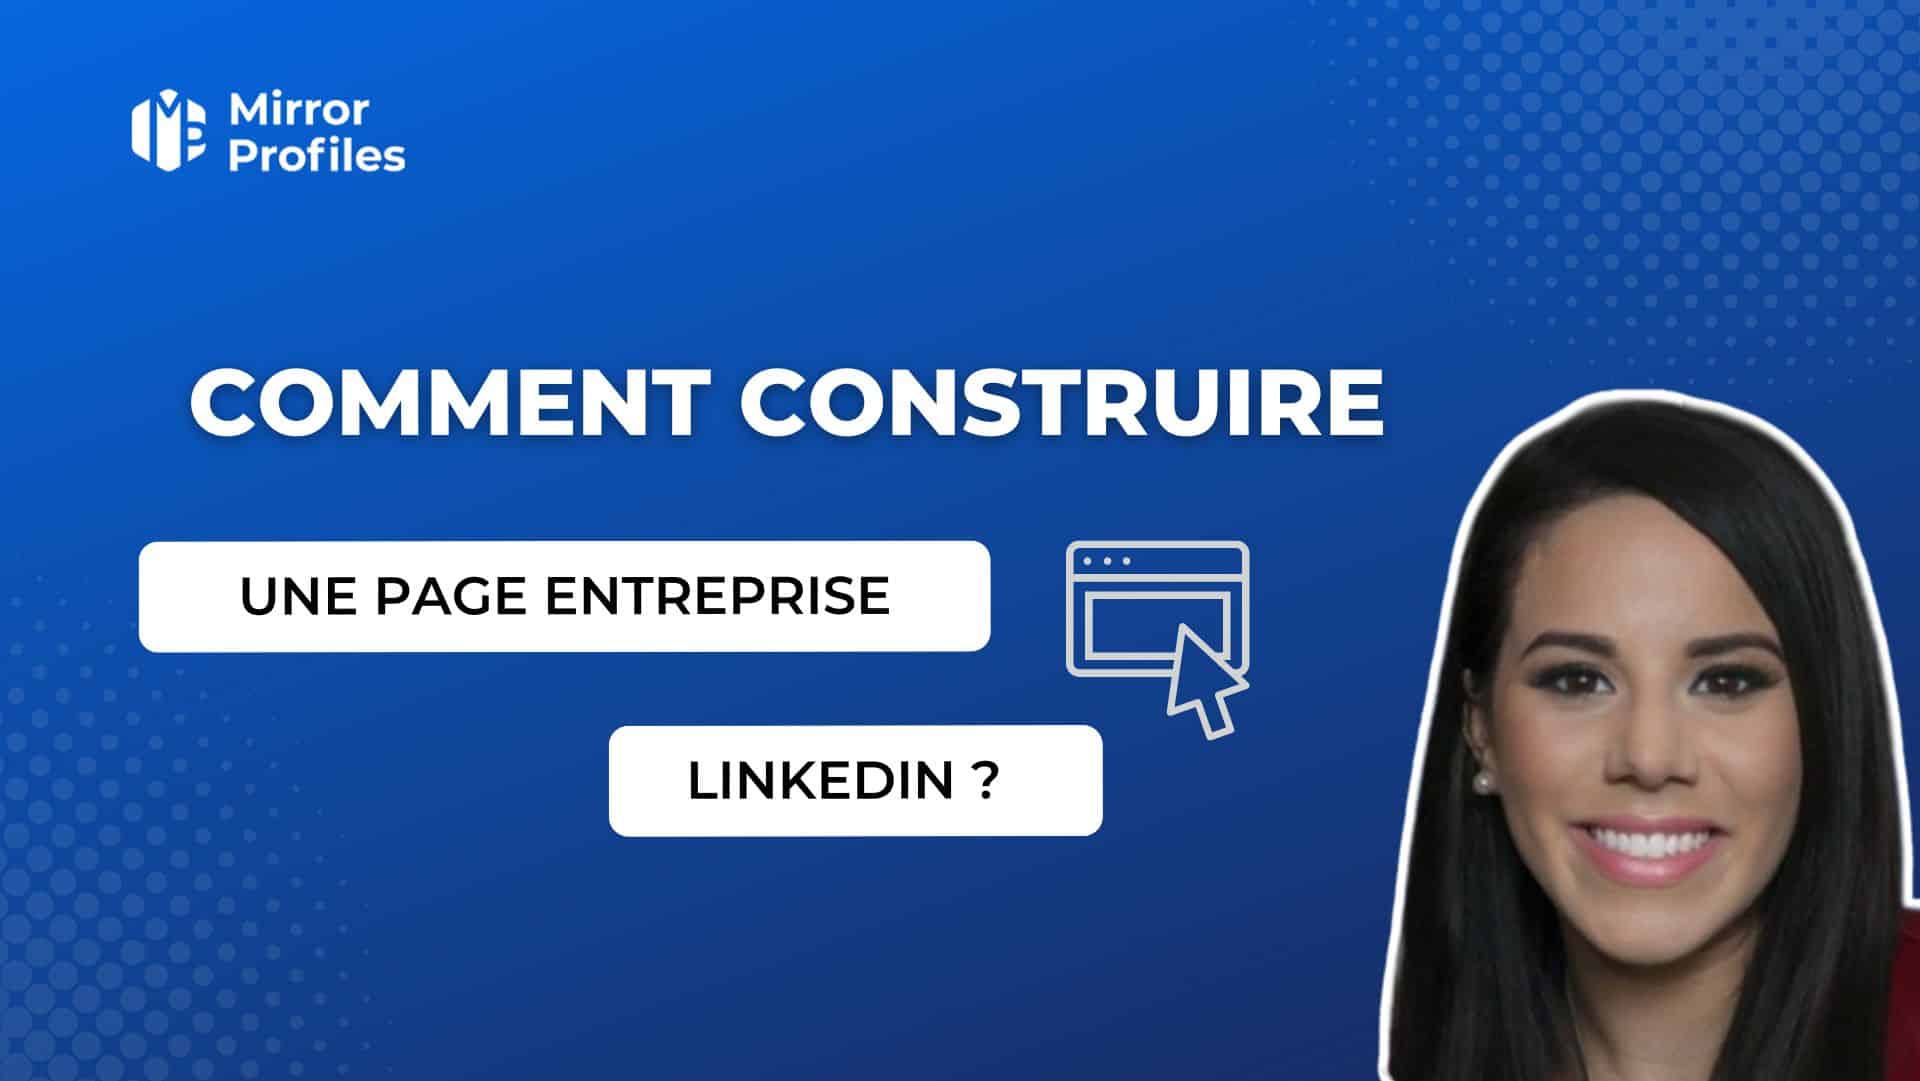 French text reads "Comment construire une page entreprise LinkedIn?" against a blue background with the Mirror Profiles logo. A headshot of a smiling woman appears in the bottom right corner, illustrating how to build a LinkedIn company page.